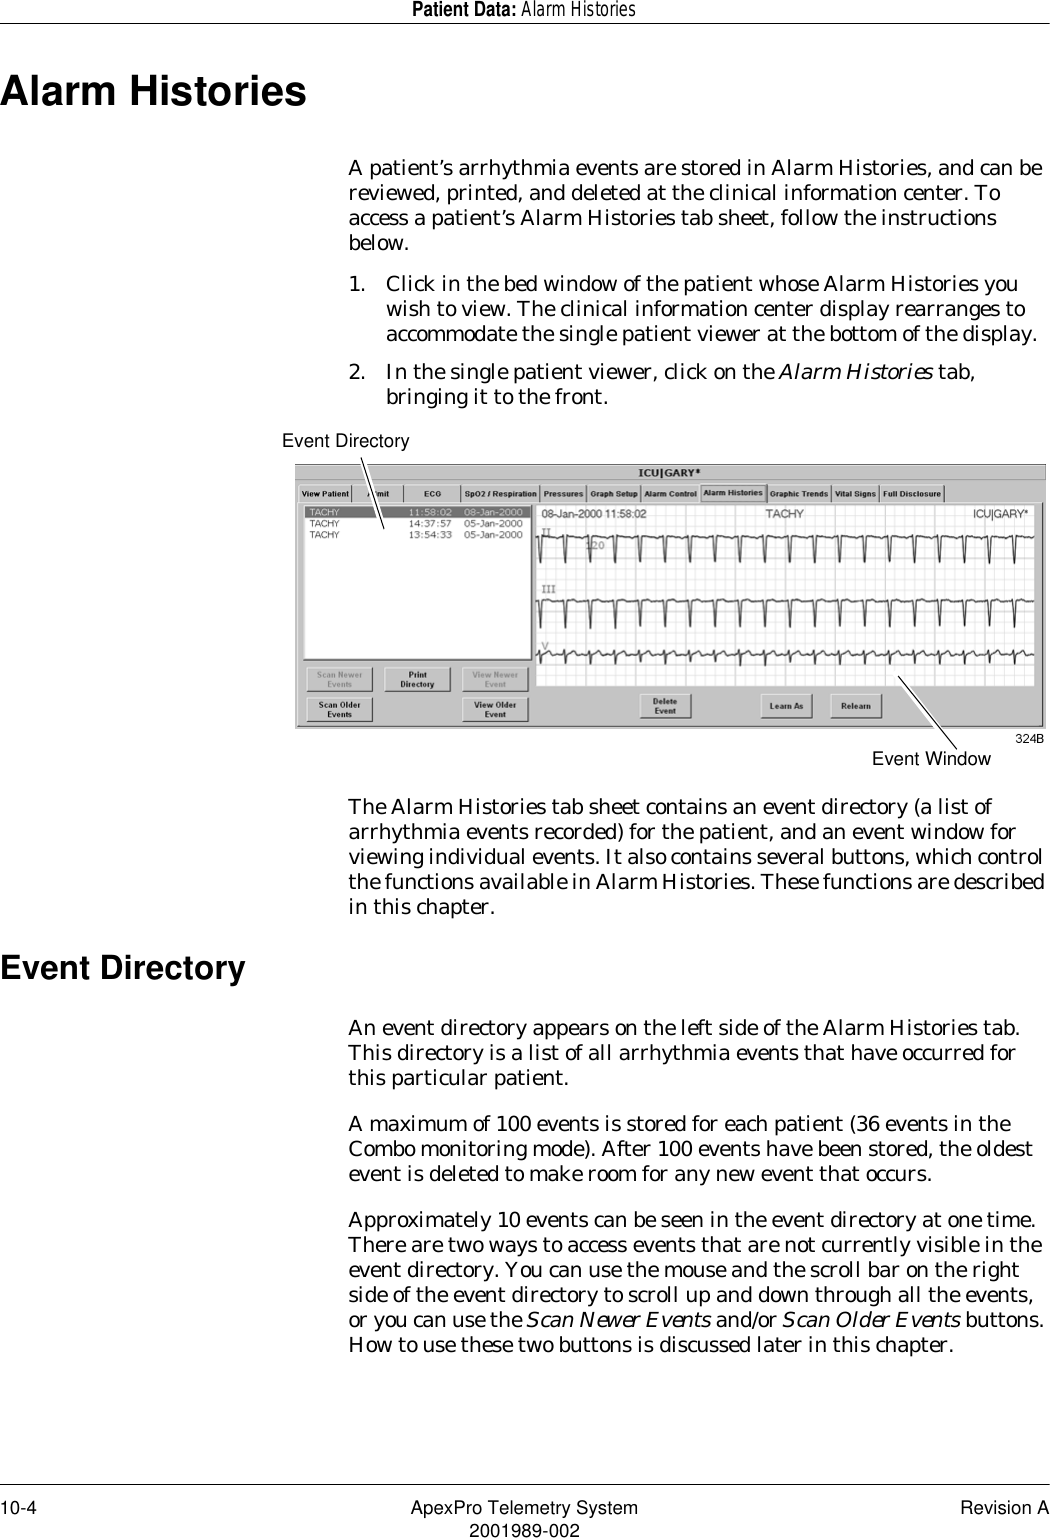 10-4 ApexPro Telemetry System Revision A2001989-002Patient Data: Alarm HistoriesAlarm HistoriesA patient’s arrhythmia events are stored in Alarm Histories, and can be reviewed, printed, and deleted at the clinical information center. To access a patient’s Alarm Histories tab sheet, follow the instructions below.1. Click in the bed window of the patient whose Alarm Histories you wish to view. The clinical information center display rearranges to accommodate the single patient viewer at the bottom of the display.2. In the single patient viewer, click on the Alarm Histories tab, bringing it to the front.The Alarm Histories tab sheet contains an event directory (a list of arrhythmia events recorded) for the patient, and an event window for viewing individual events. It also contains several buttons, which control the functions available in Alarm Histories. These functions are described in this chapter.Event DirectoryAn event directory appears on the left side of the Alarm Histories tab. This directory is a list of all arrhythmia events that have occurred for this particular patient. A maximum of 100 events is stored for each patient (36 events in the Combo monitoring mode). After 100 events have been stored, the oldest event is deleted to make room for any new event that occurs.Approximately 10 events can be seen in the event directory at one time. There are two ways to access events that are not currently visible in the event directory. You can use the mouse and the scroll bar on the right side of the event directory to scroll up and down through all the events, or you can use the Scan Newer Events and/or Scan Older Events buttons. How to use these two buttons is discussed later in this chapter.Event DirectoryEvent Window